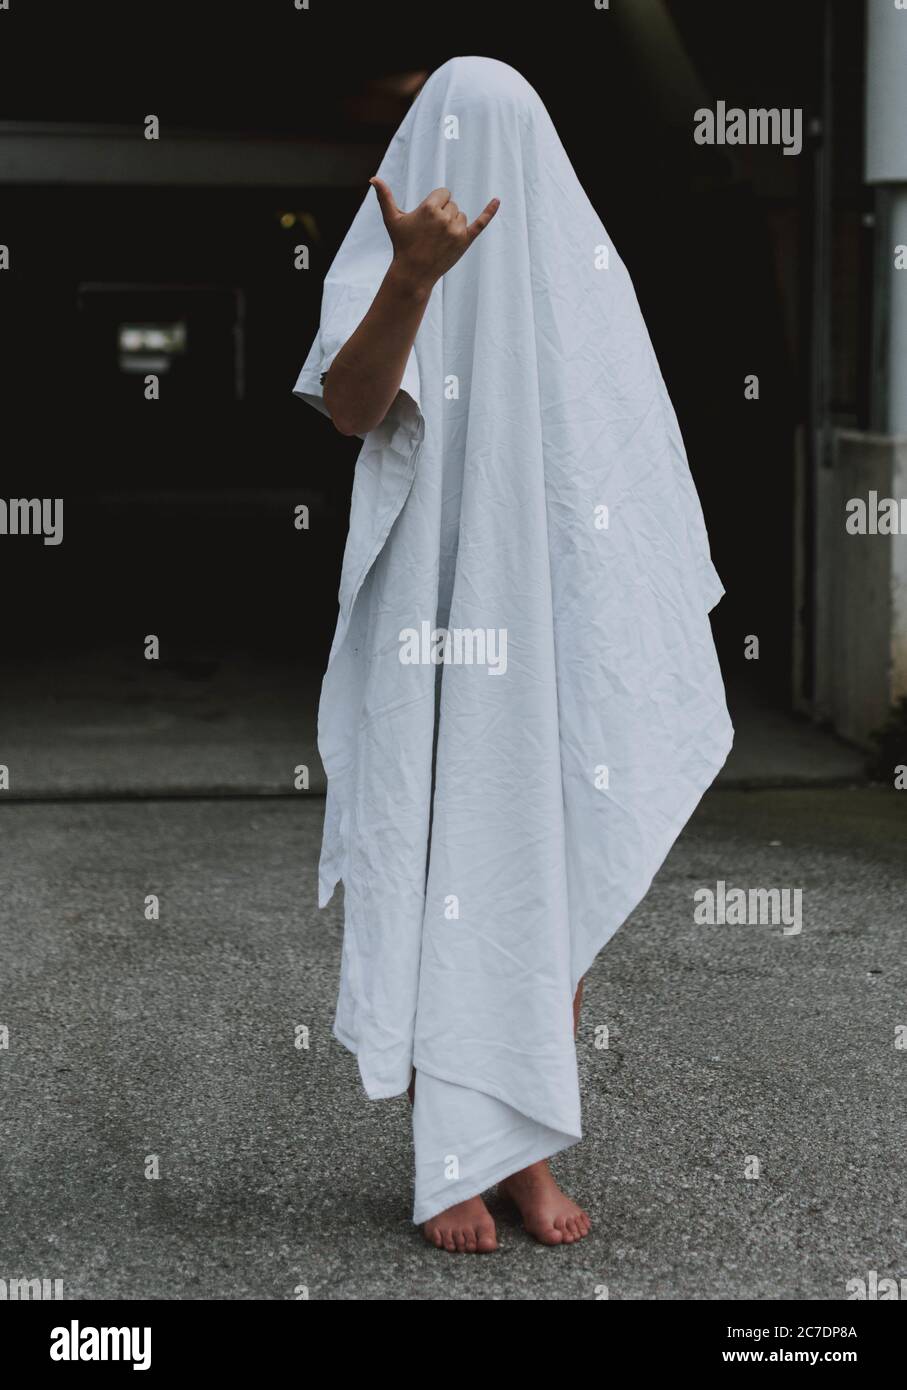 Vertical shot of a barefoot person wearing white ghost sheet showing shaka sign Stock Photo